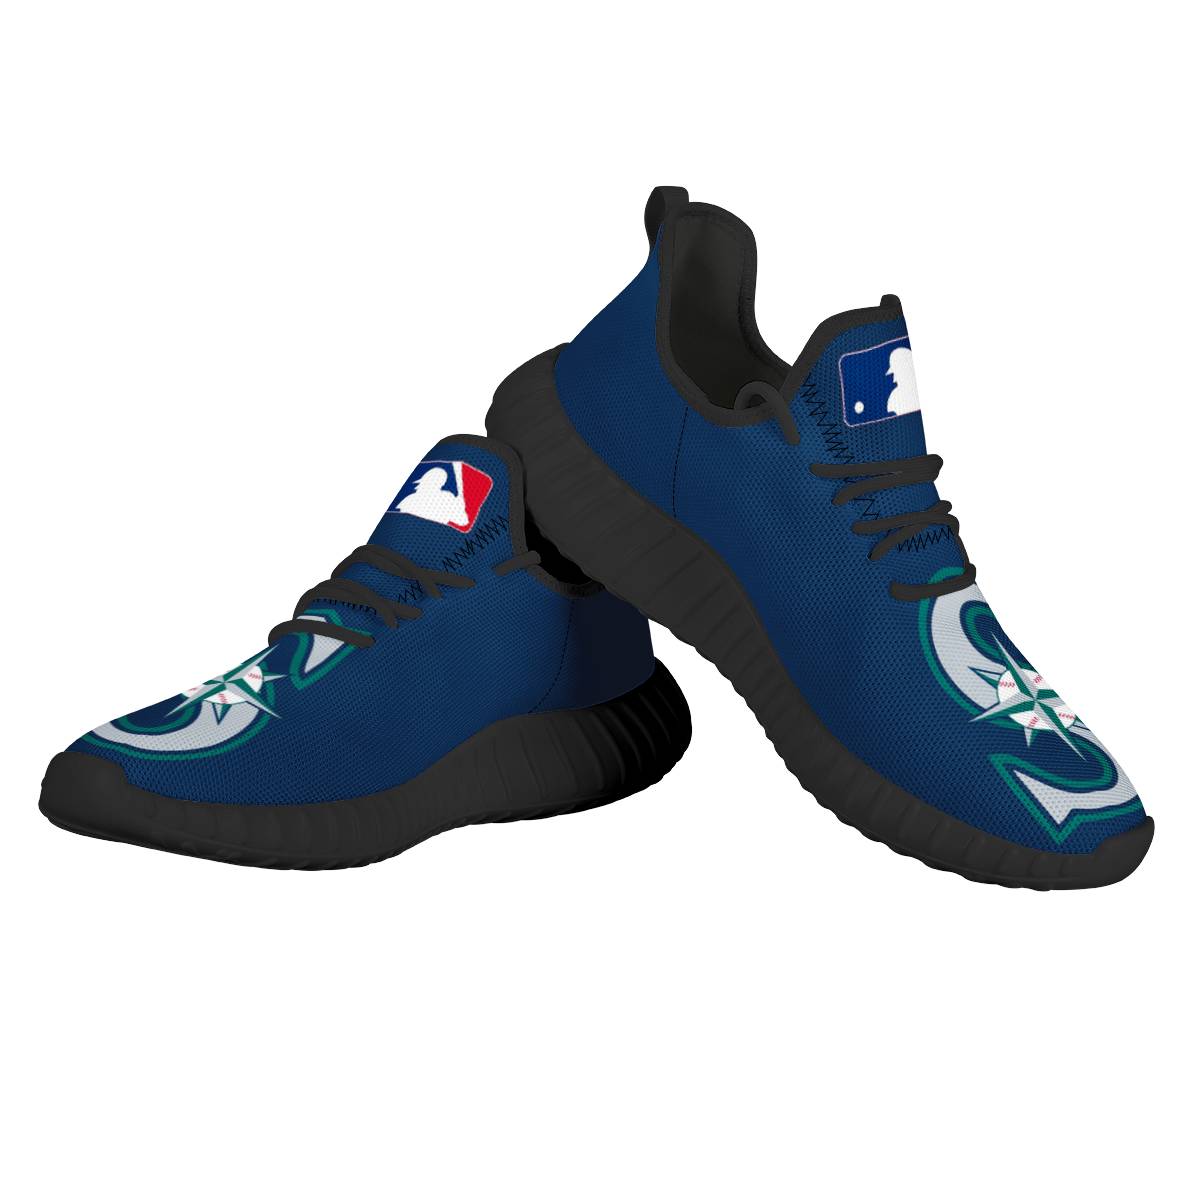 Seattle Mariners shoes